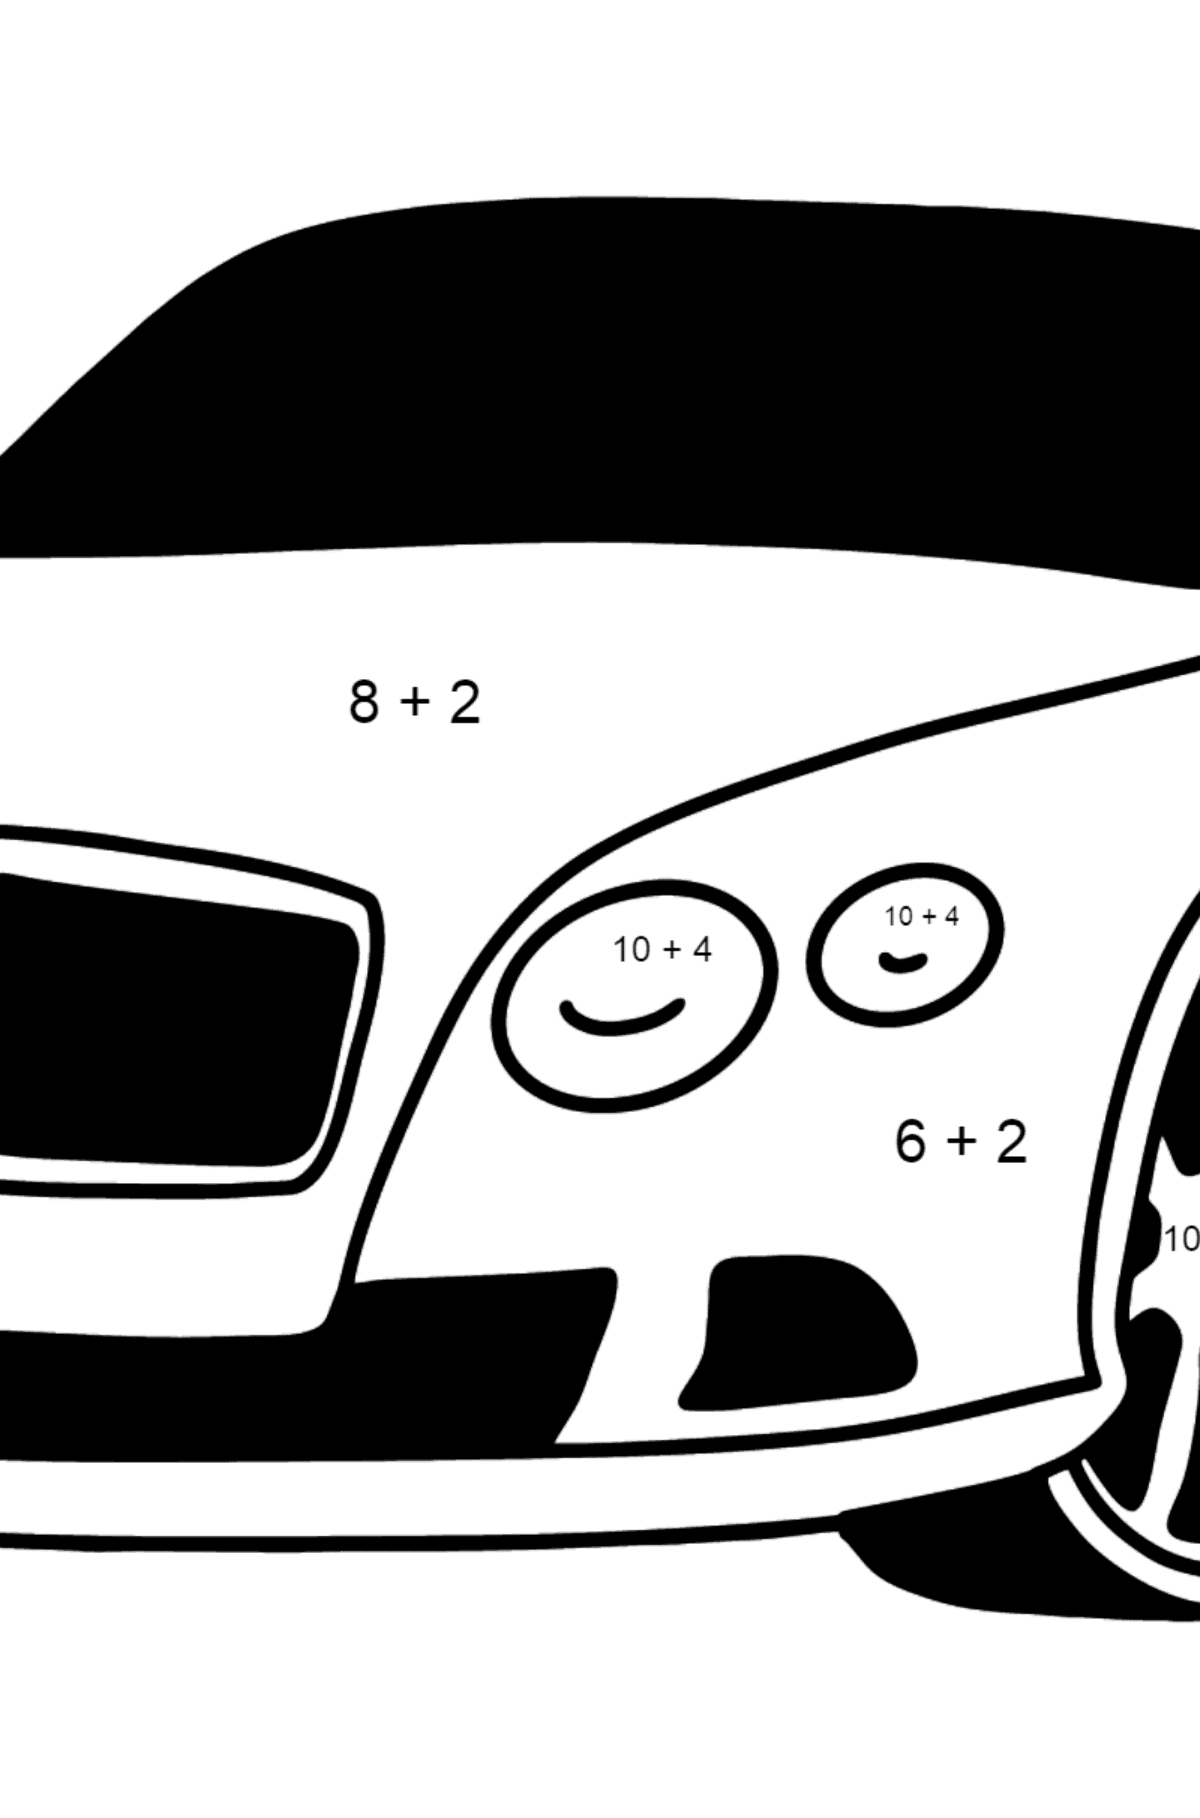 Bentley Continental GT Car coloring page - Math Coloring - Addition for Kids